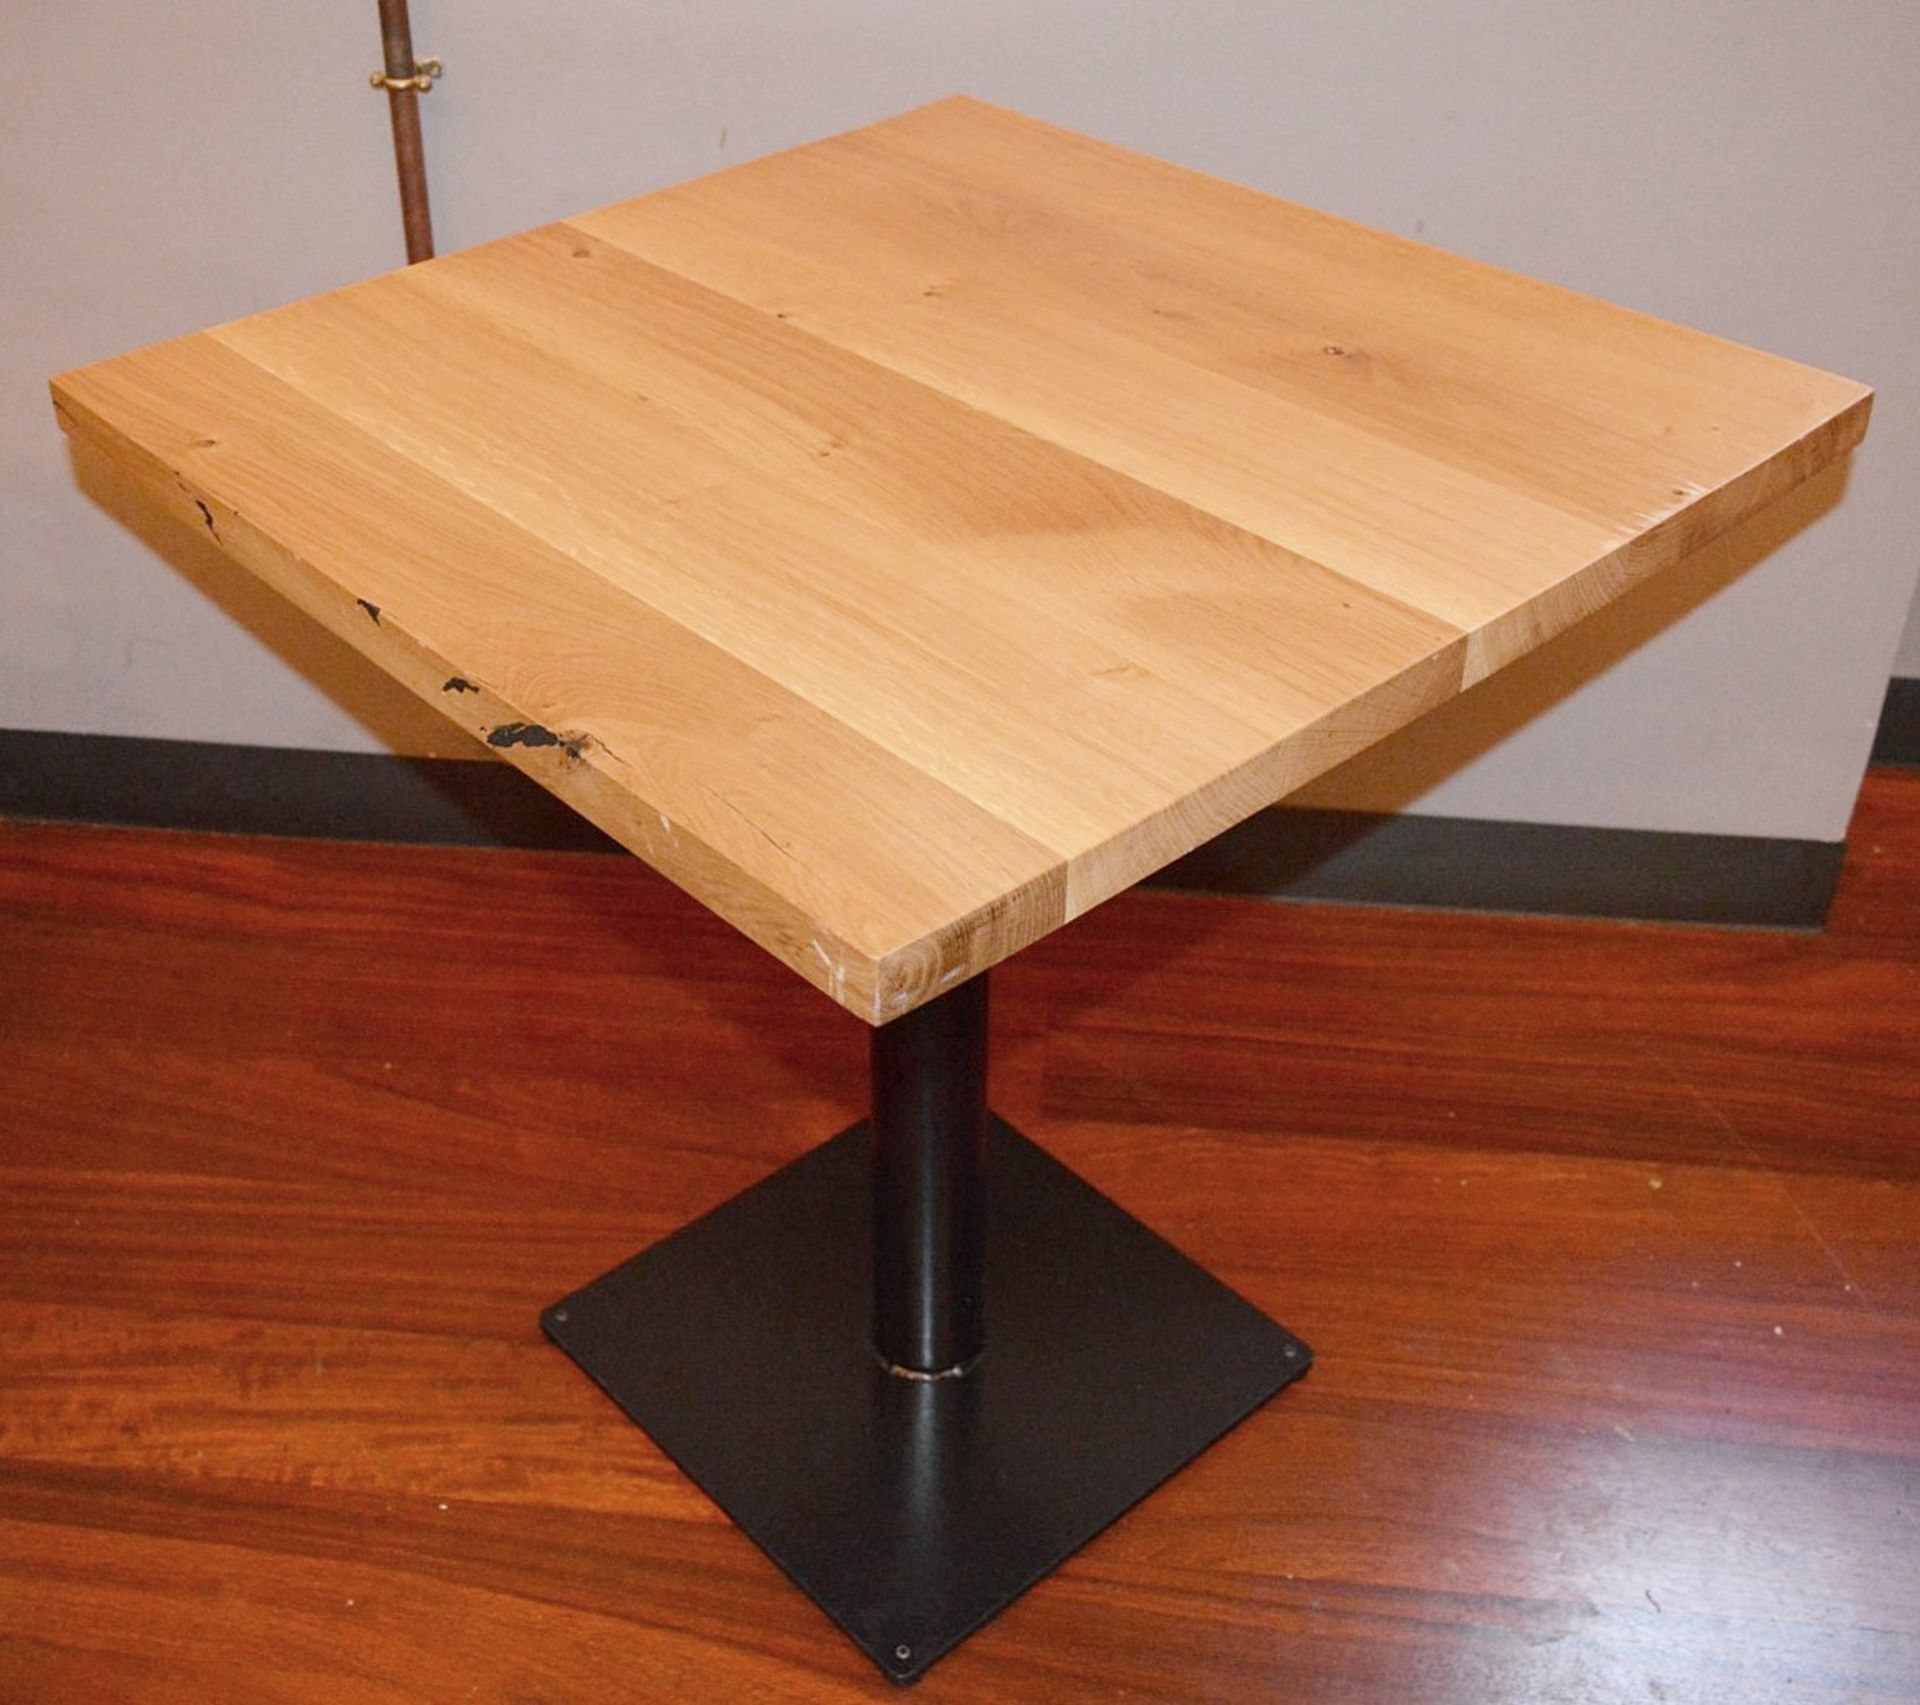 1 x Square Restaurant / Bistro Table - Wooden Topped With A Metal Base - 70x70cm - Recently